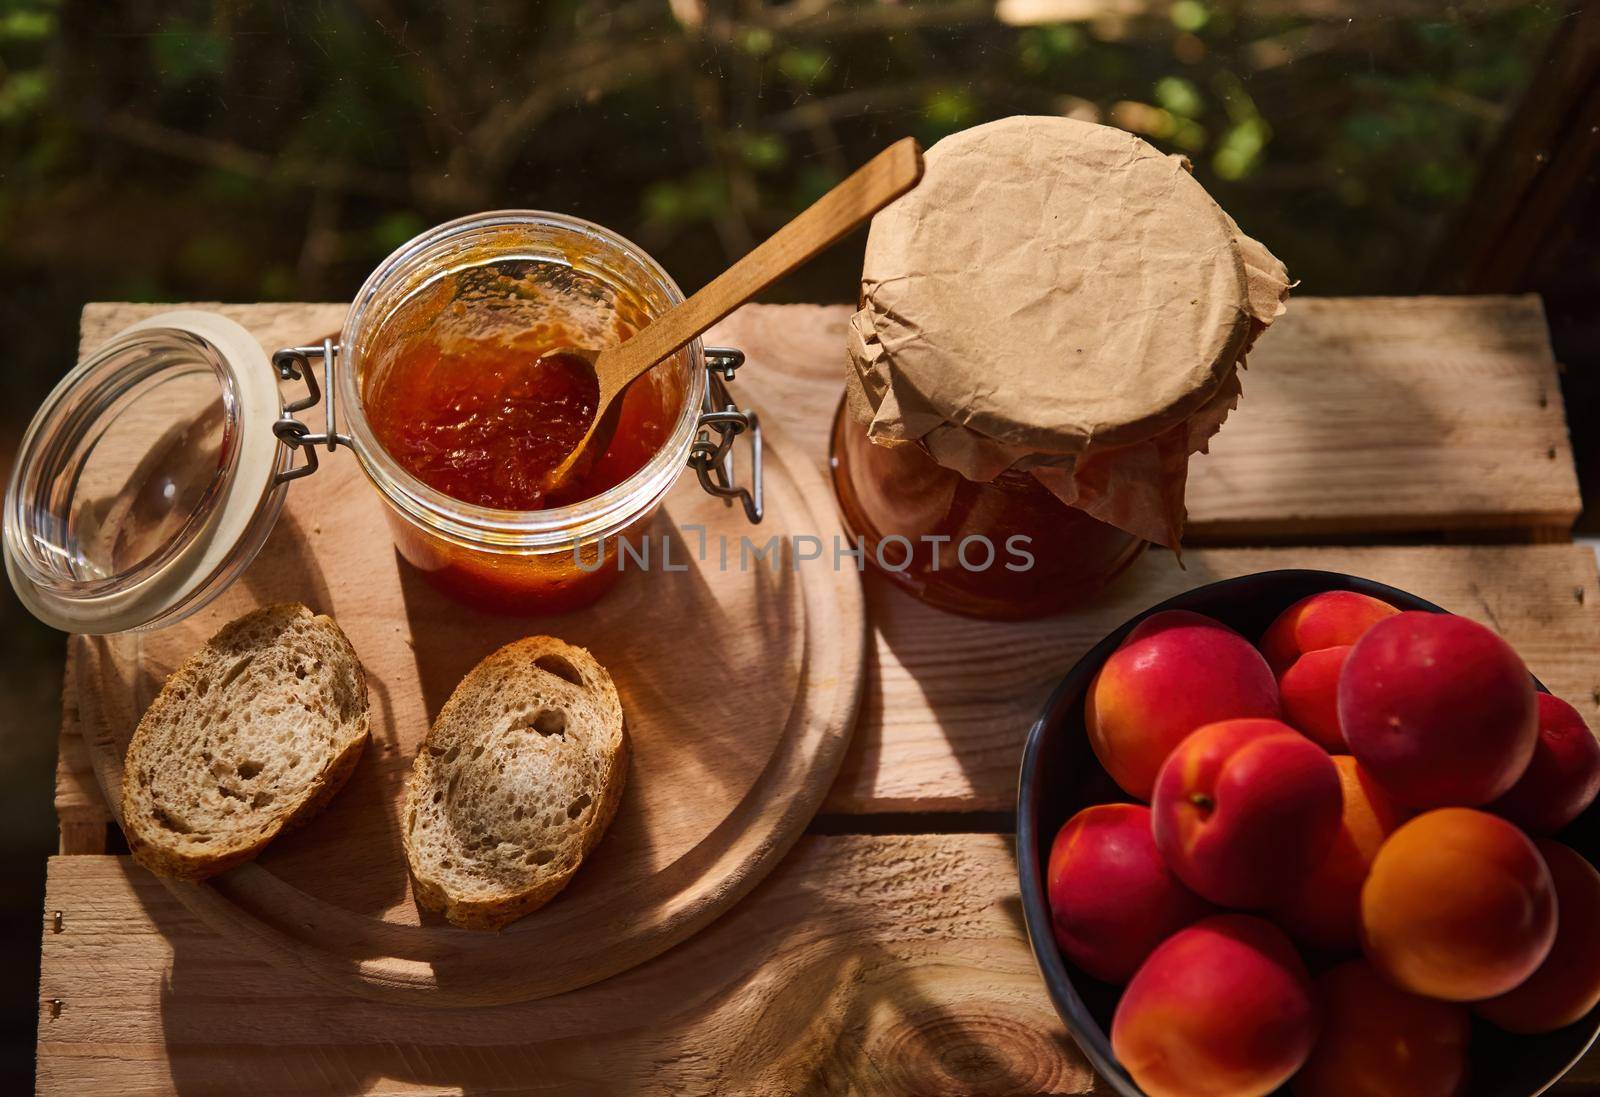 Top view. Still life. Homemade apricot jam in a glass jar with a wooden spoon, slices of whole grain bread on wooden crate near a blue ceramic bowl with freshly picked red ripe apricots. Country style